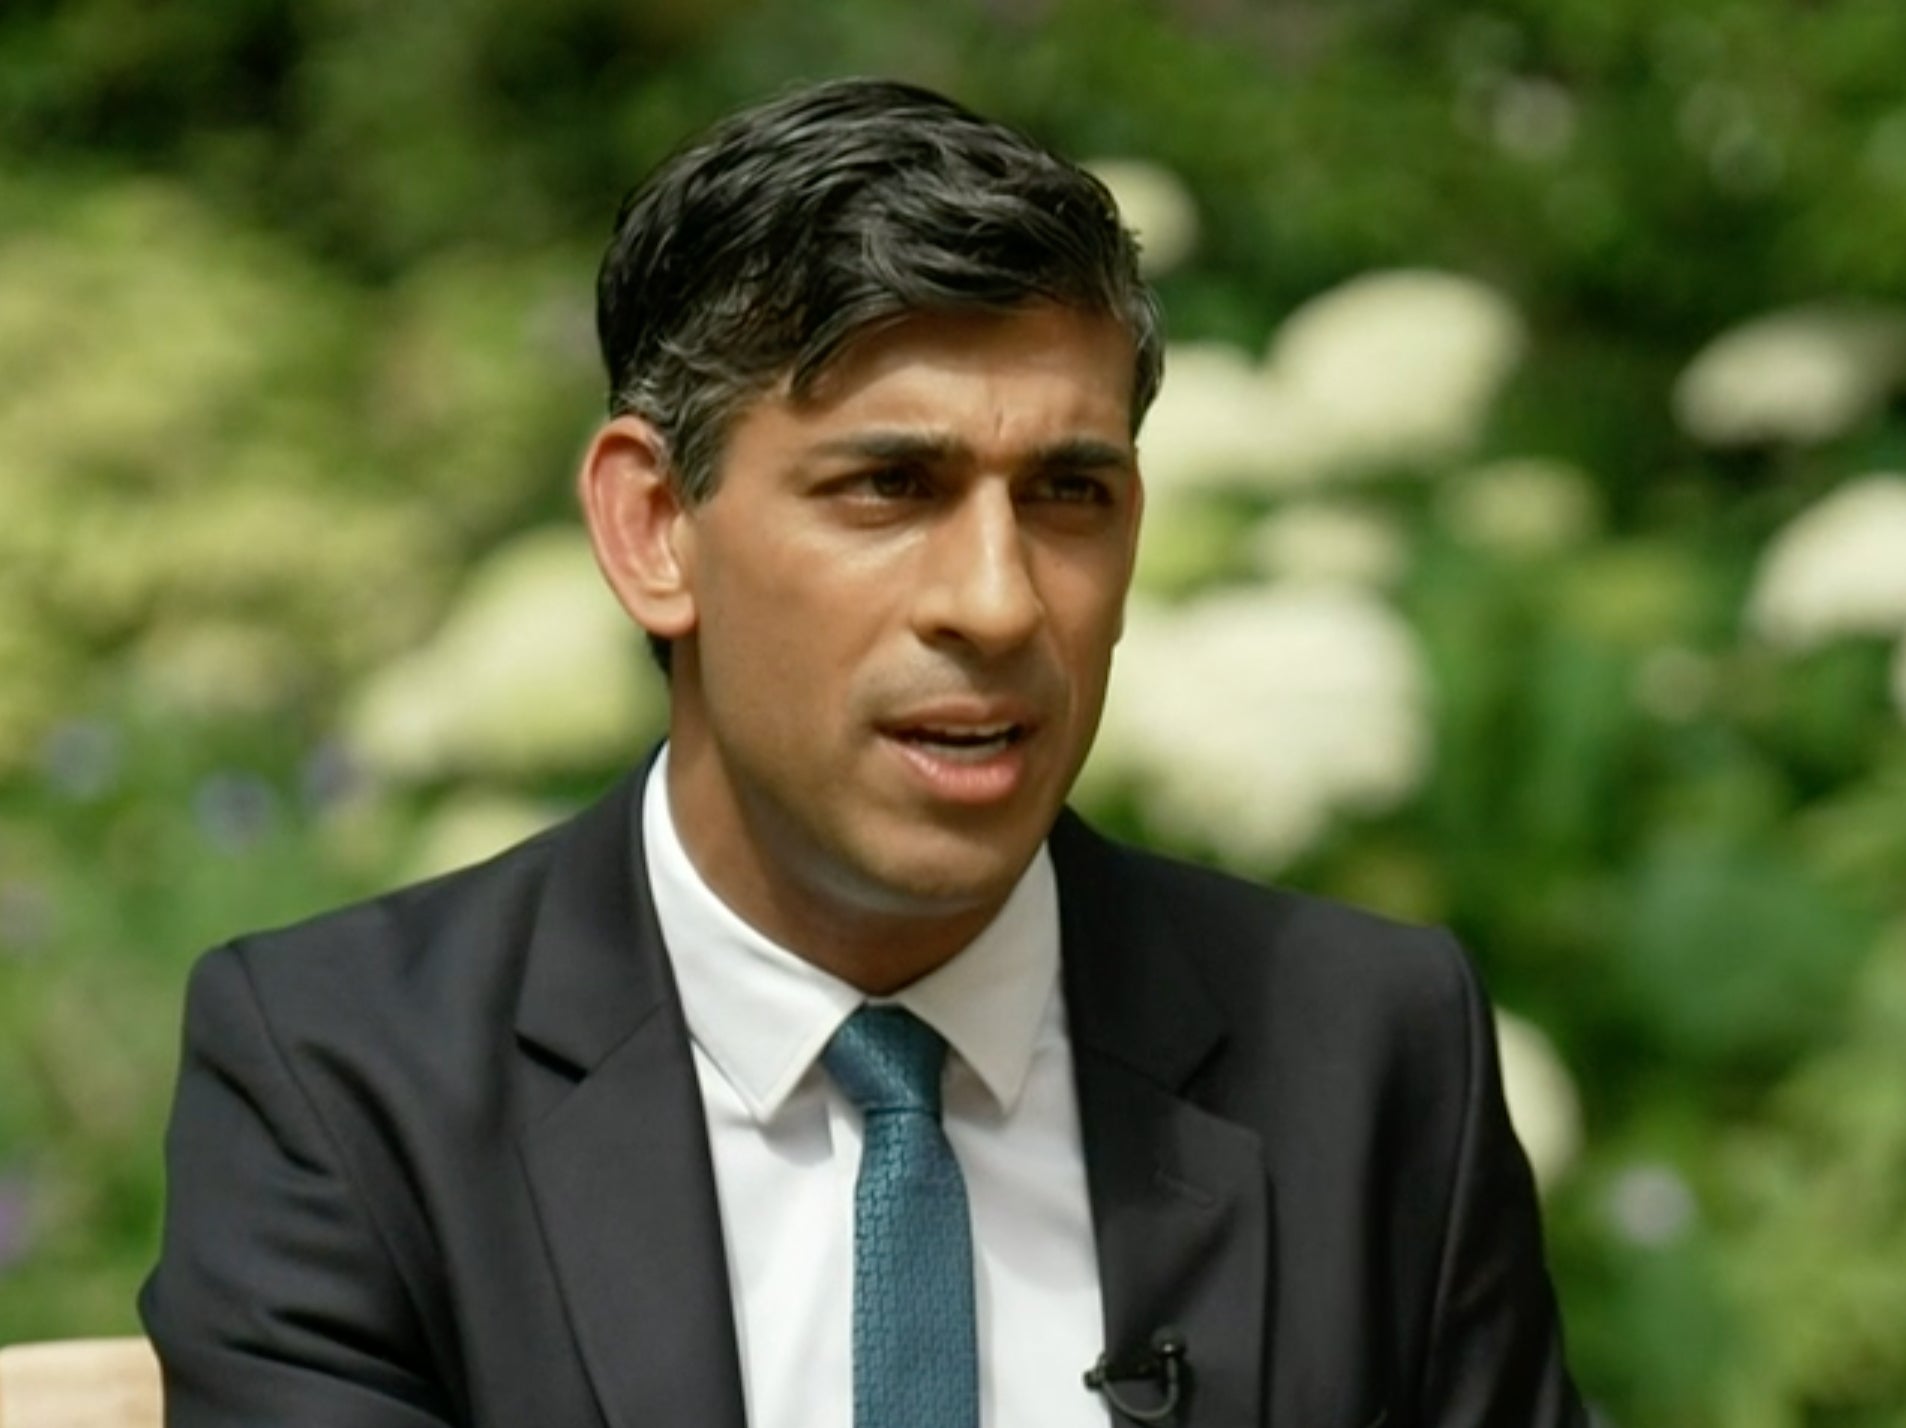 Rishi Sunak offered support to Andrew Bailey during BBC interview